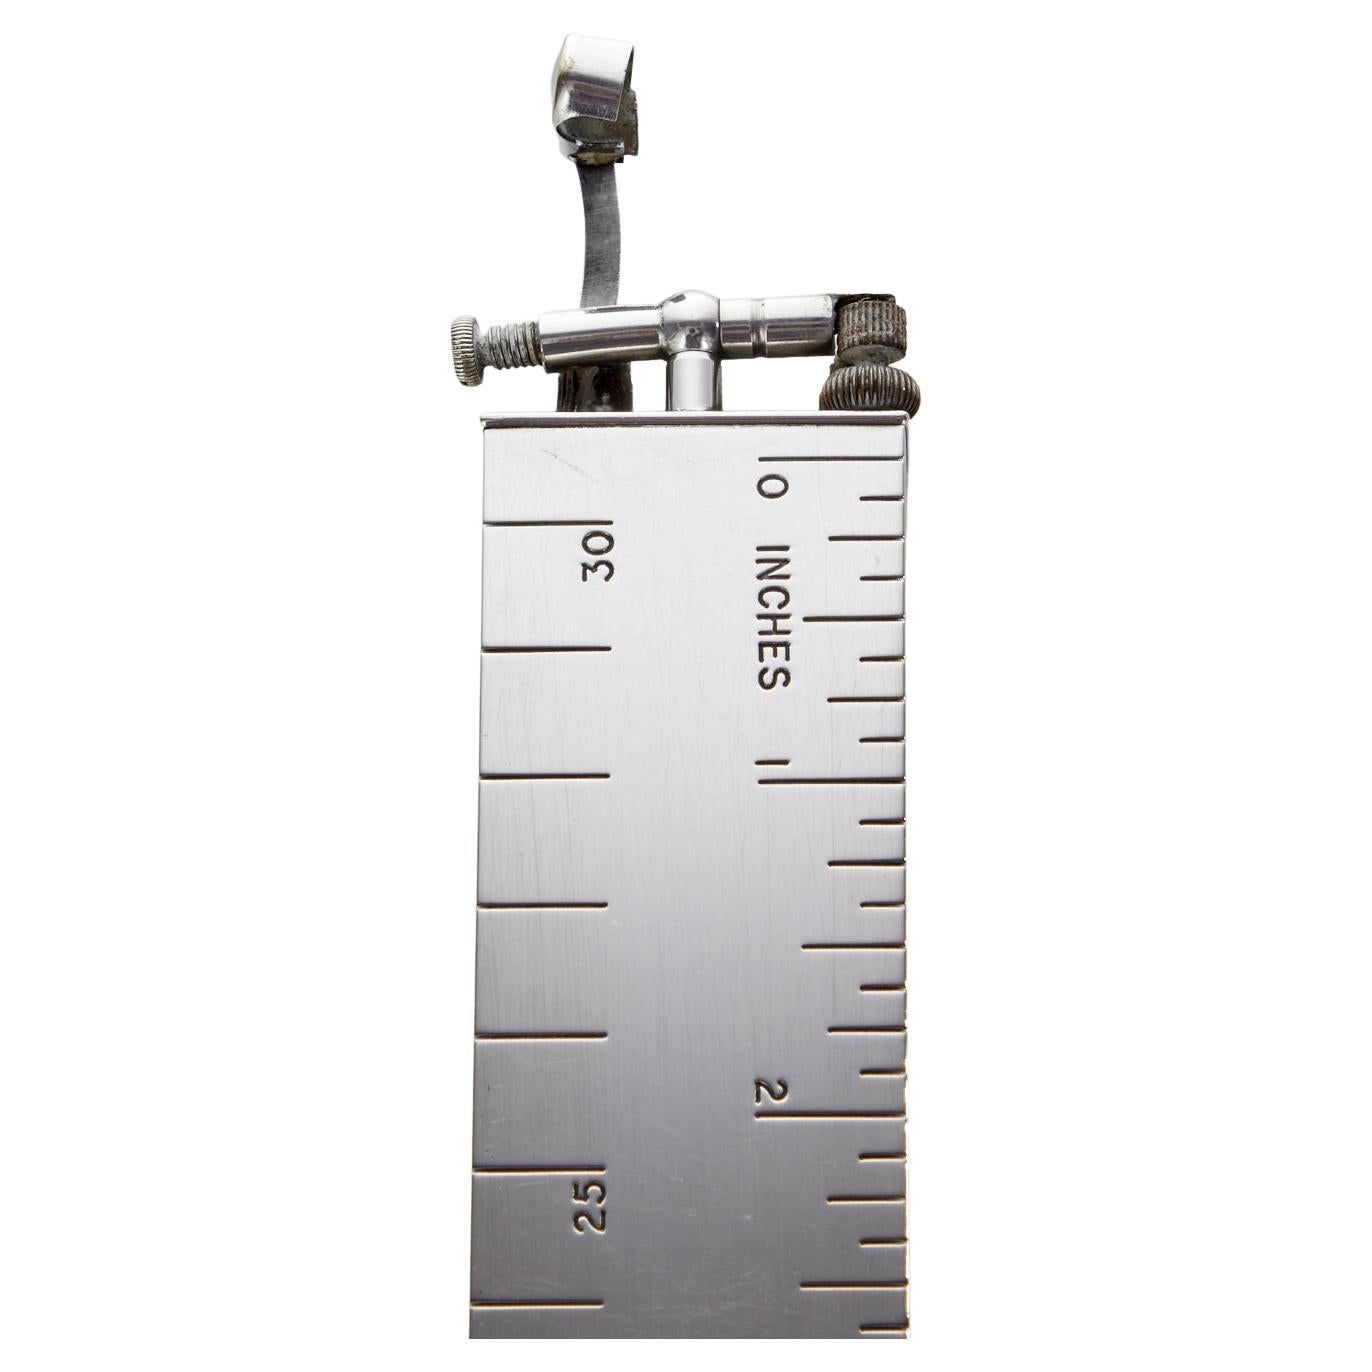 A wonderful mid 20th century vintage dunhill lighter & ruler date Circa 1950.

One of those iconic items by Dunhill, which is Marked on the base and lighter arm. 
Engraved Measurements both in inches and centimetres. The exterior is in good order